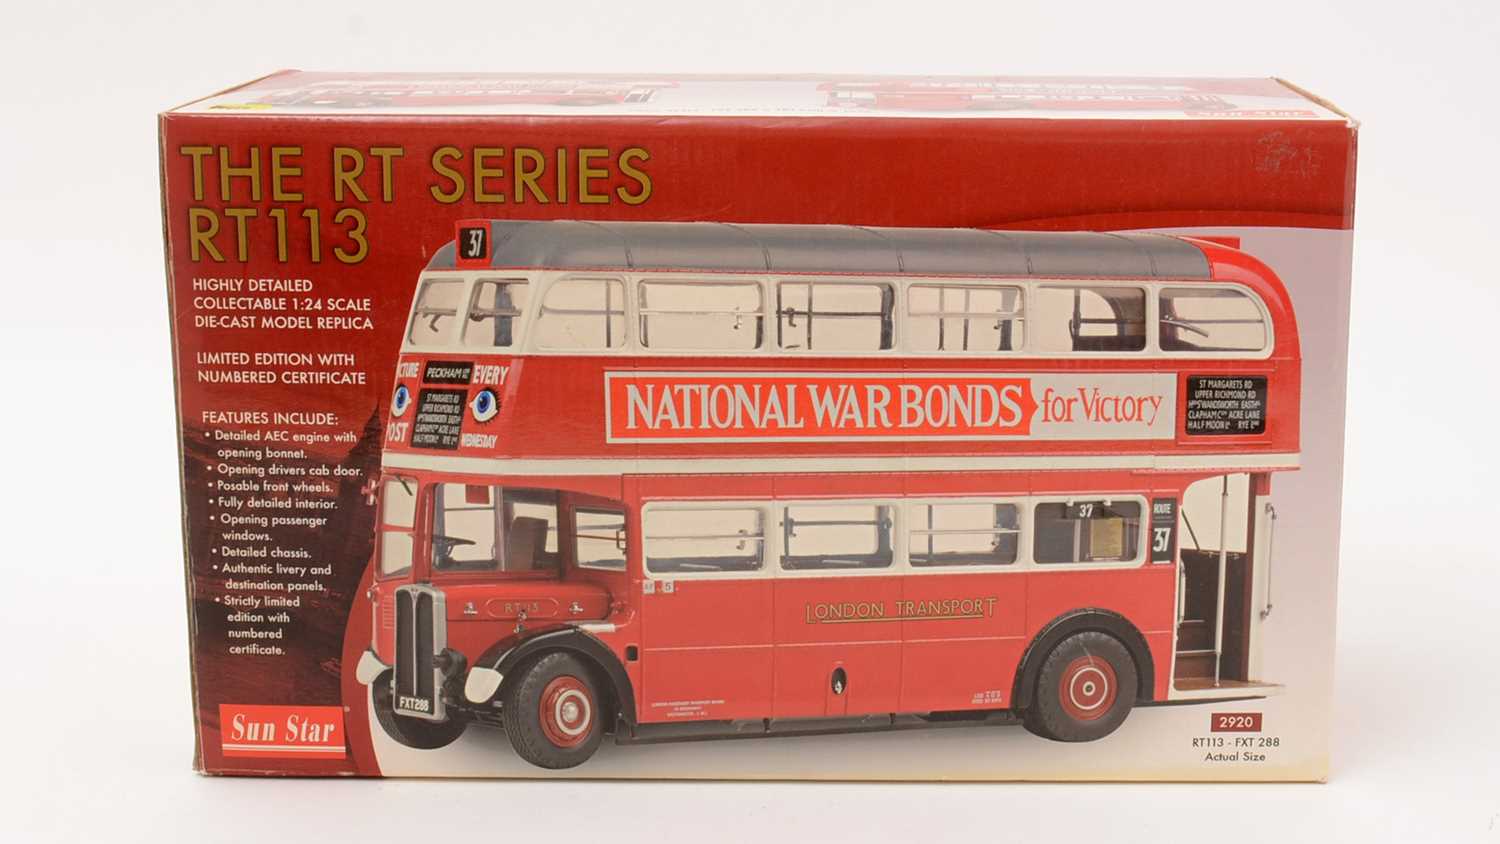 Sunstar 1:24 scale diecast model replica of the RT series RT113 2920